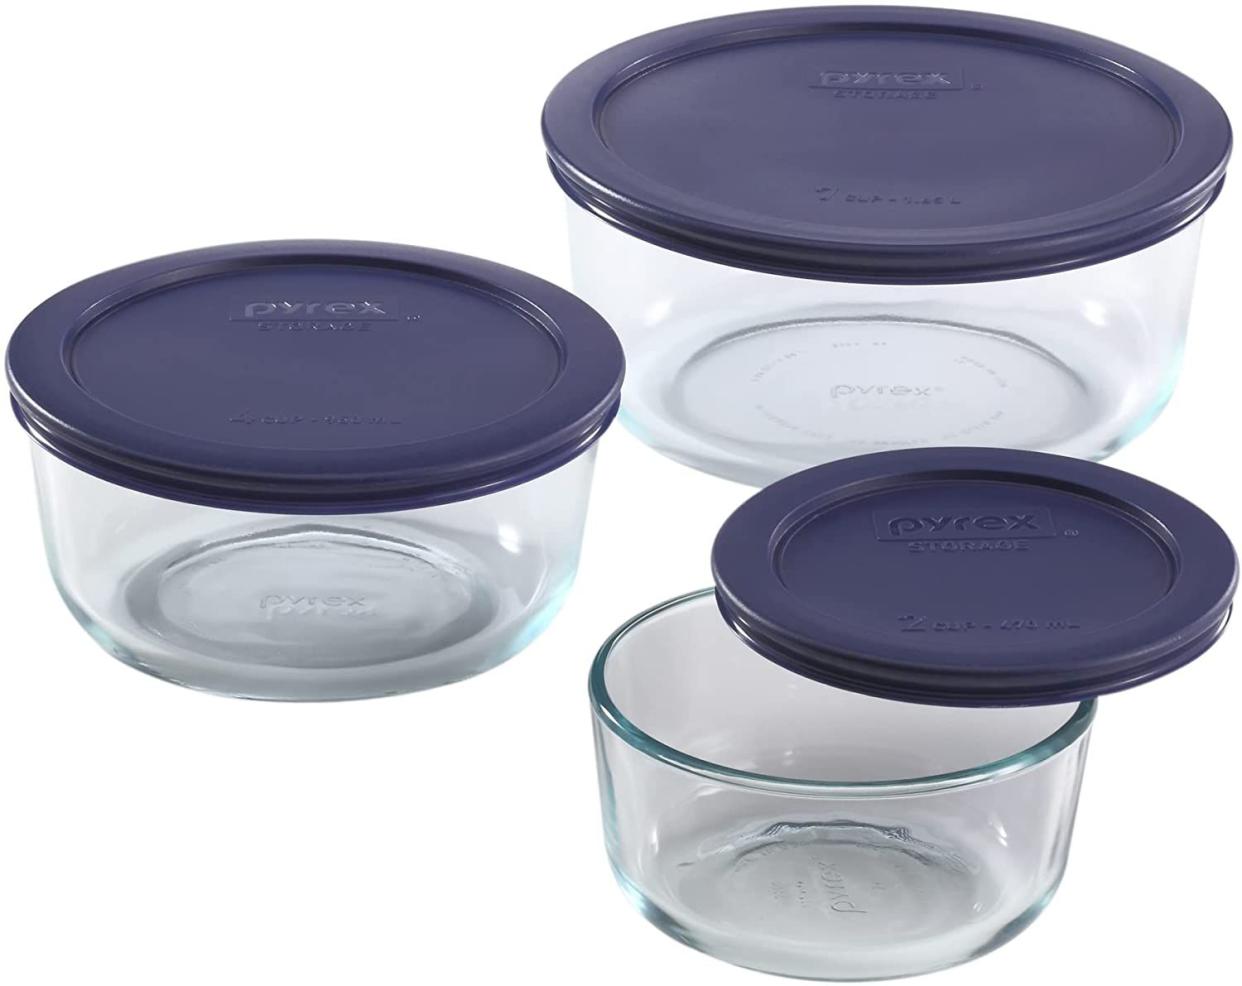 Pyrex Circular Glass Storage Container Set with Lids, 6 Piece